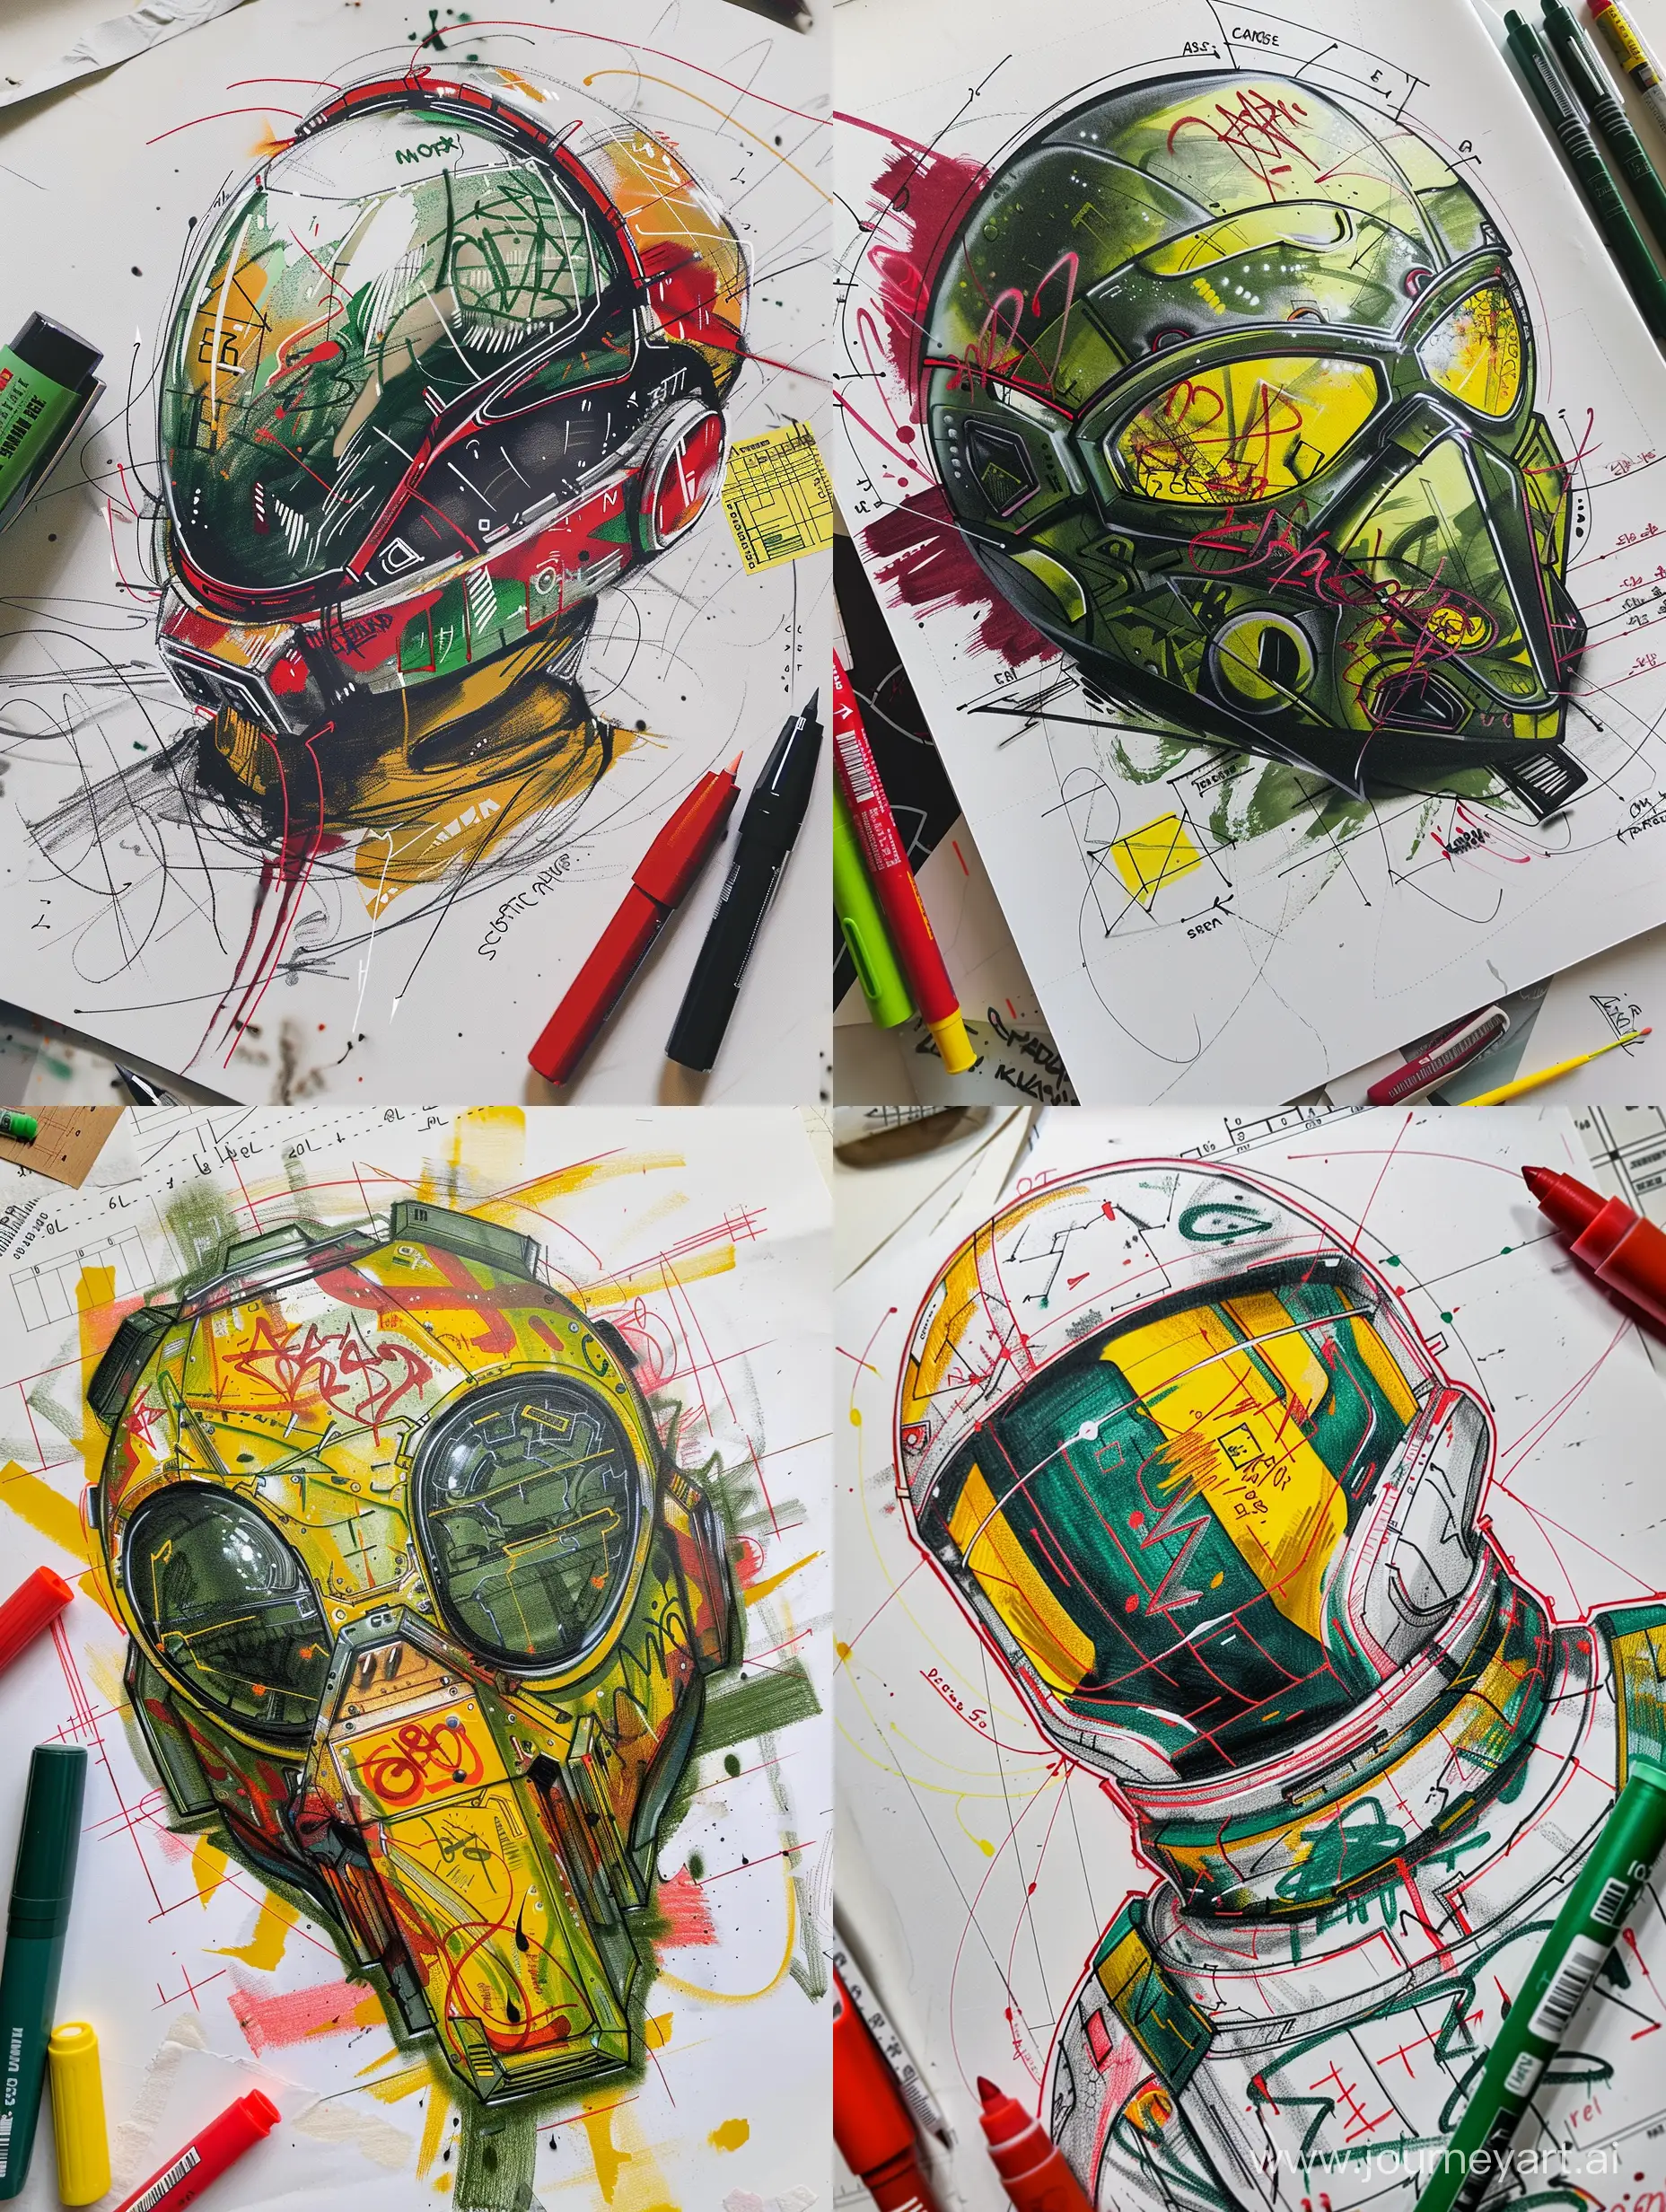 Sketch of Scifi mask device for astronauts covered with graffiti sleek design strong contours green and red marker yellow with measurements notes random highly detailed on paper background sref sketch technological highly detailed vibrant 
